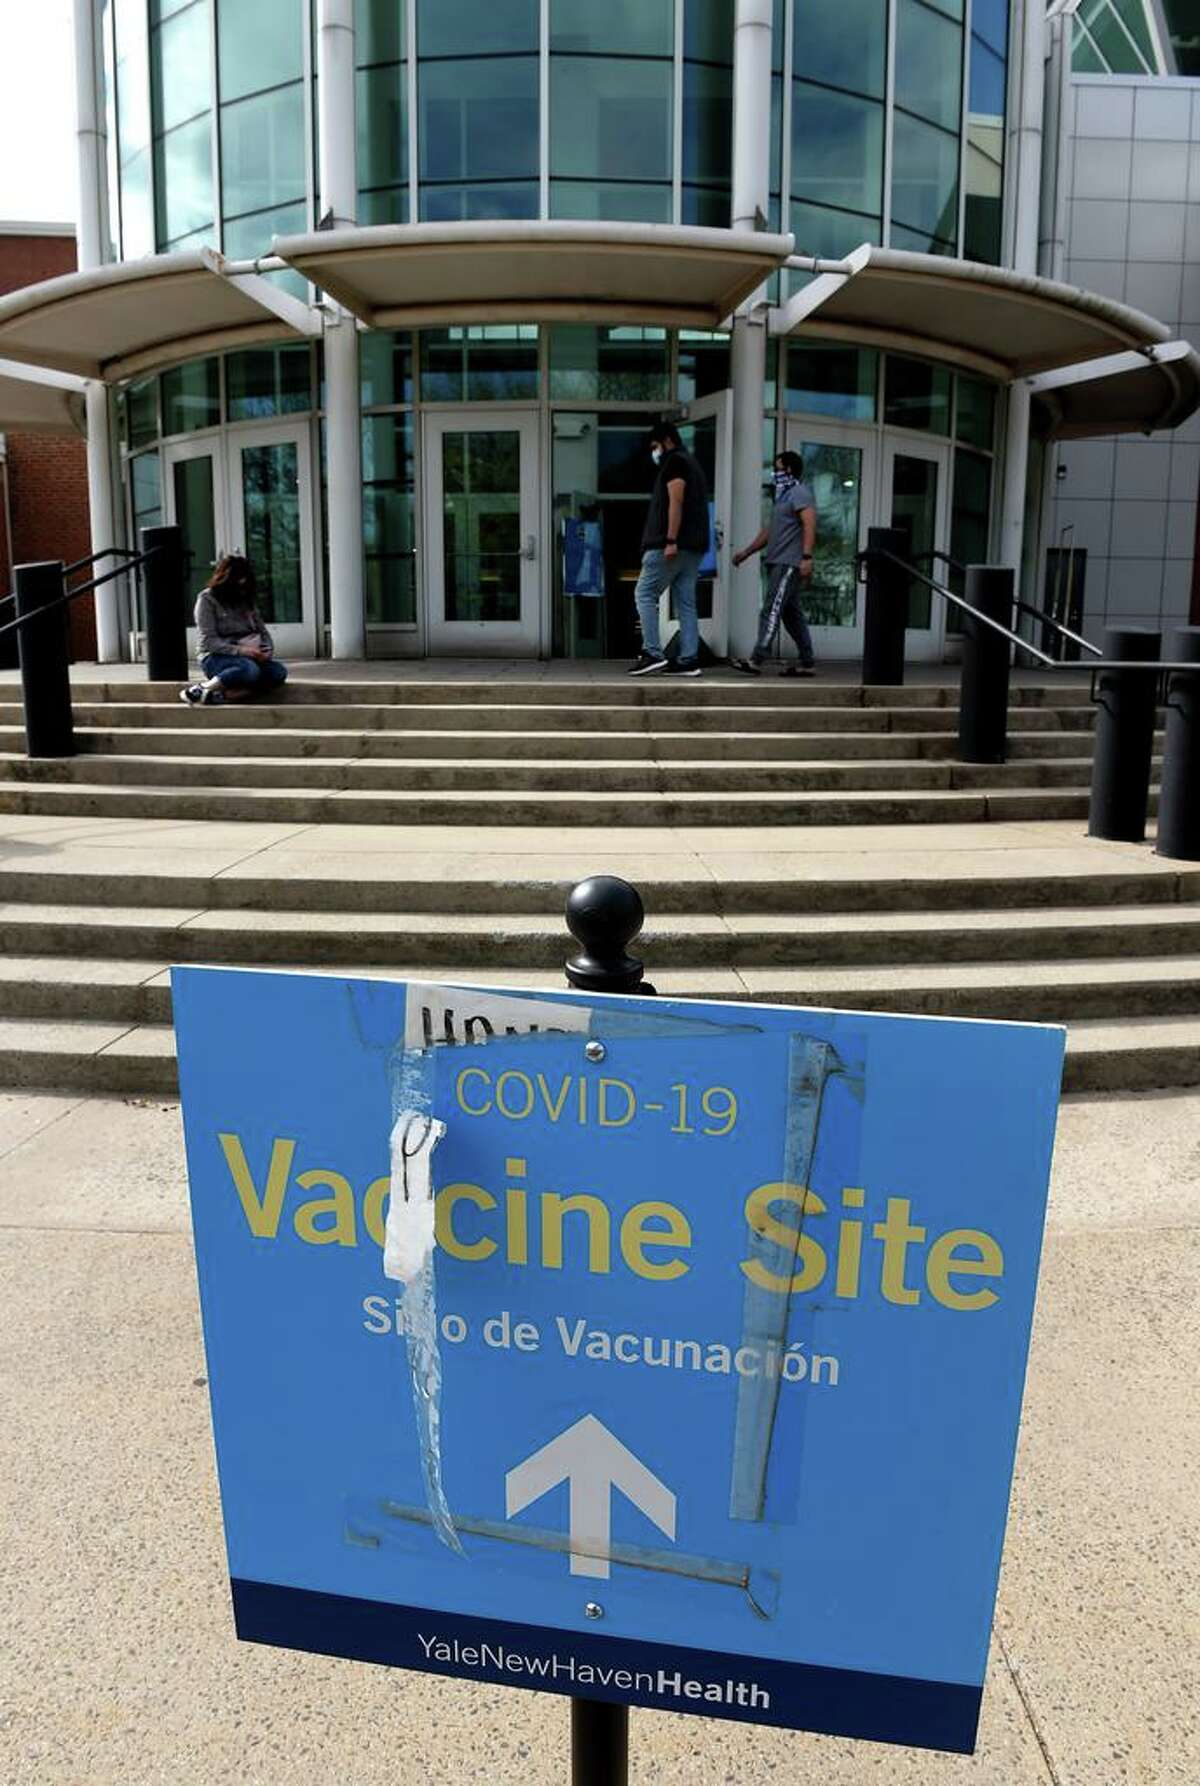 The COVID-19 Vaccination Site at the Floyd Little Athletic Center in New Haven, April 13, 2021.